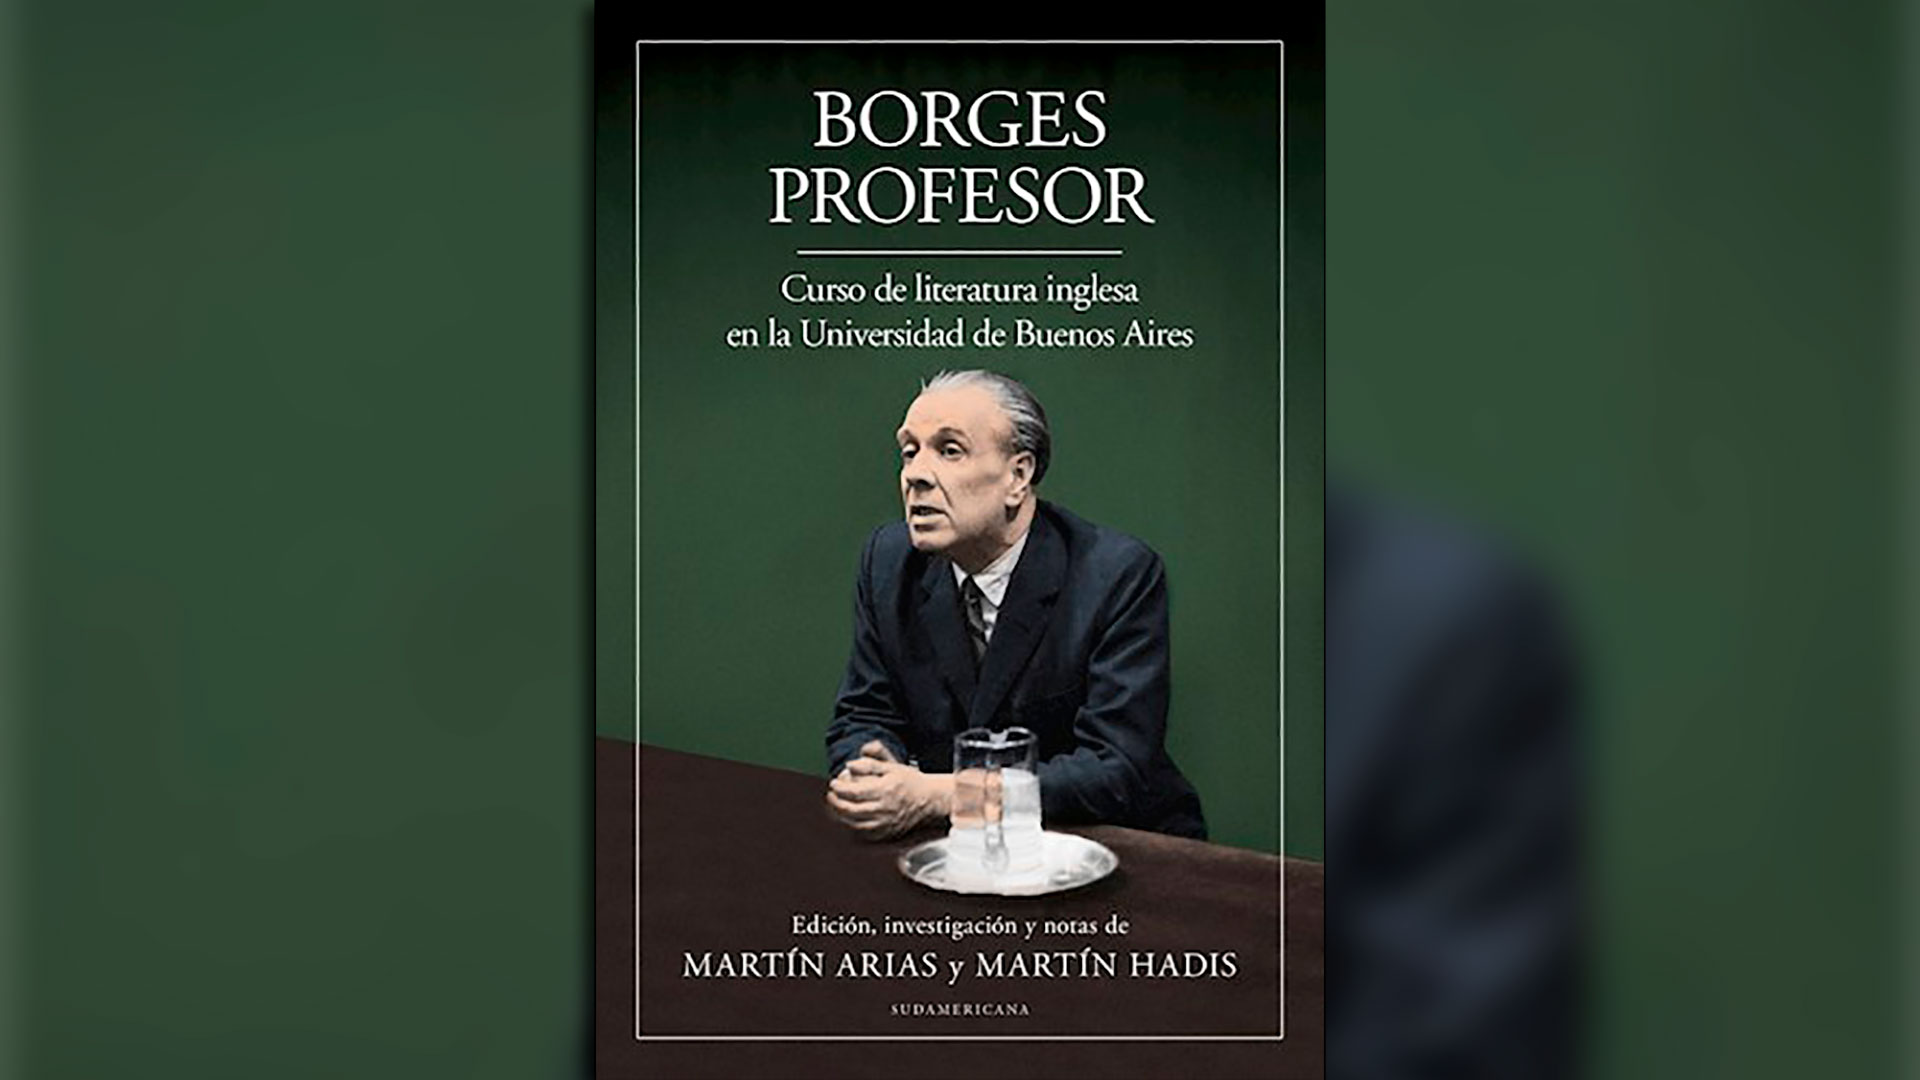 Five Borges pounds for only 250 Argentine pesos: offer ends tomorrow